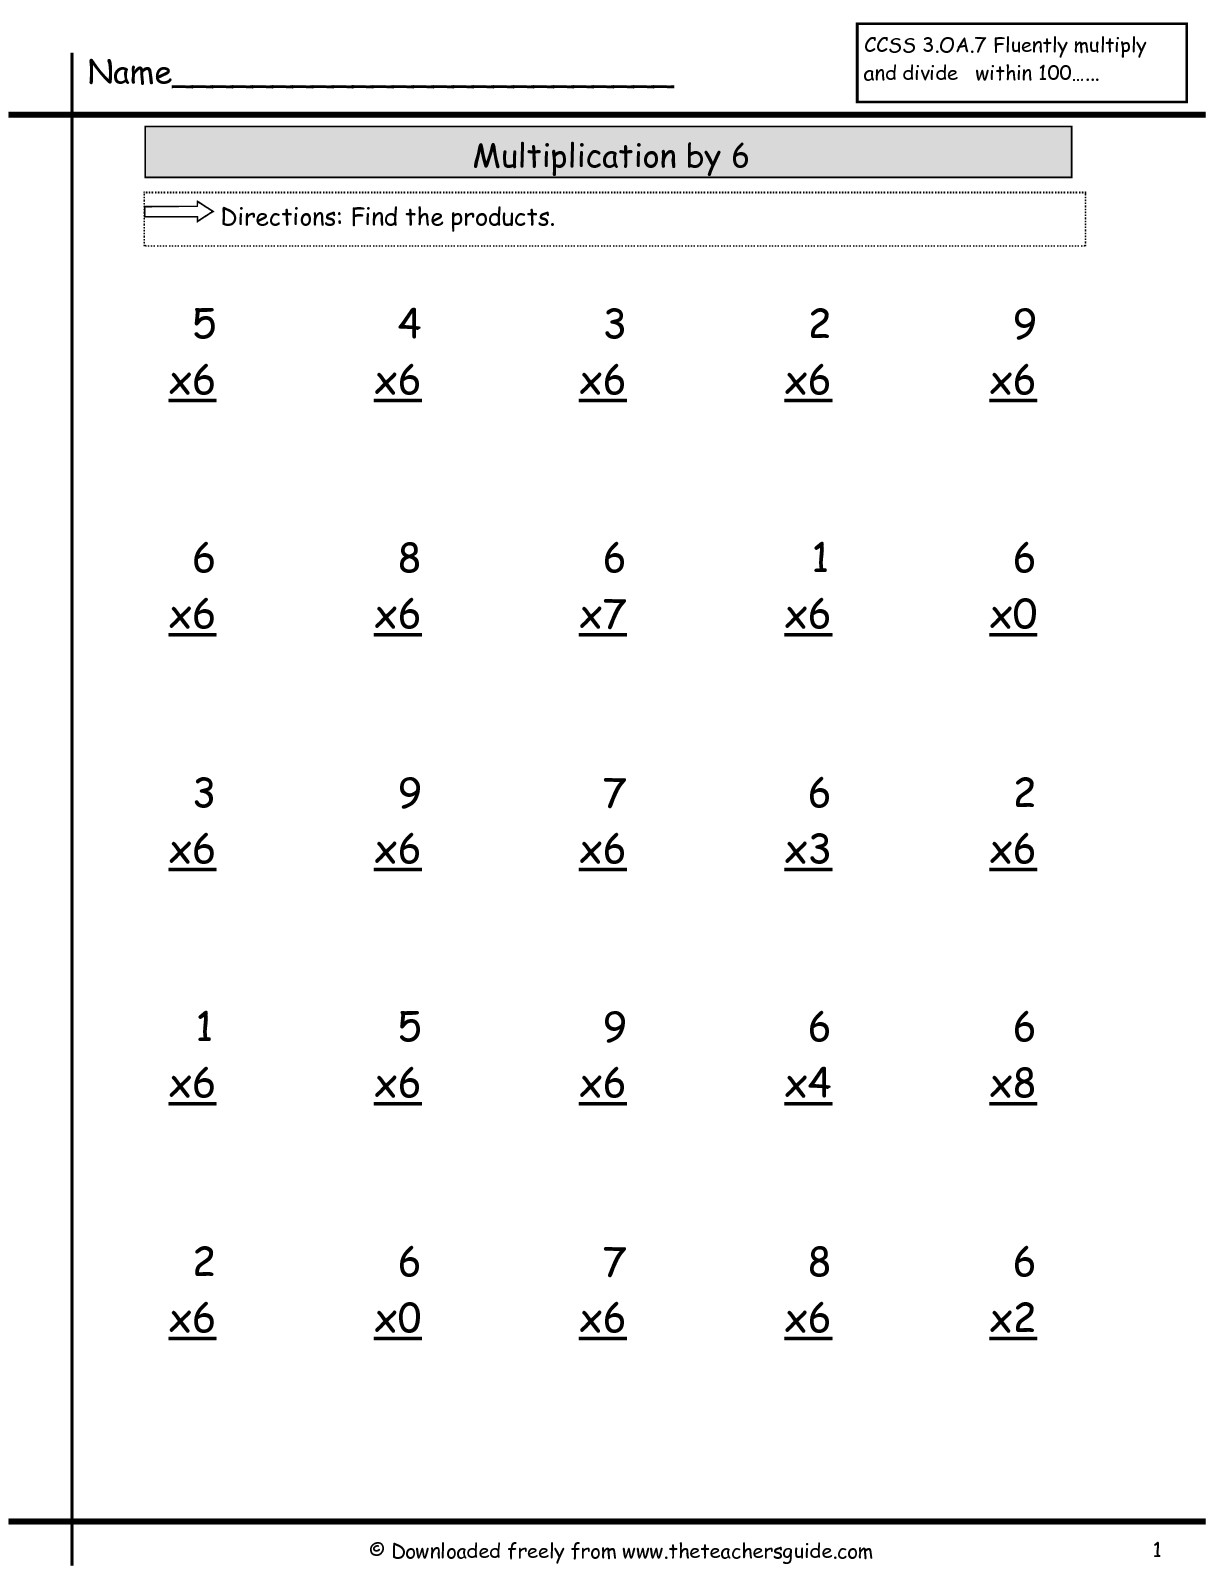 Multiplication Facts Worksheets From The Teacher&amp;#039;s Guide in Multiplication Worksheets Number 7